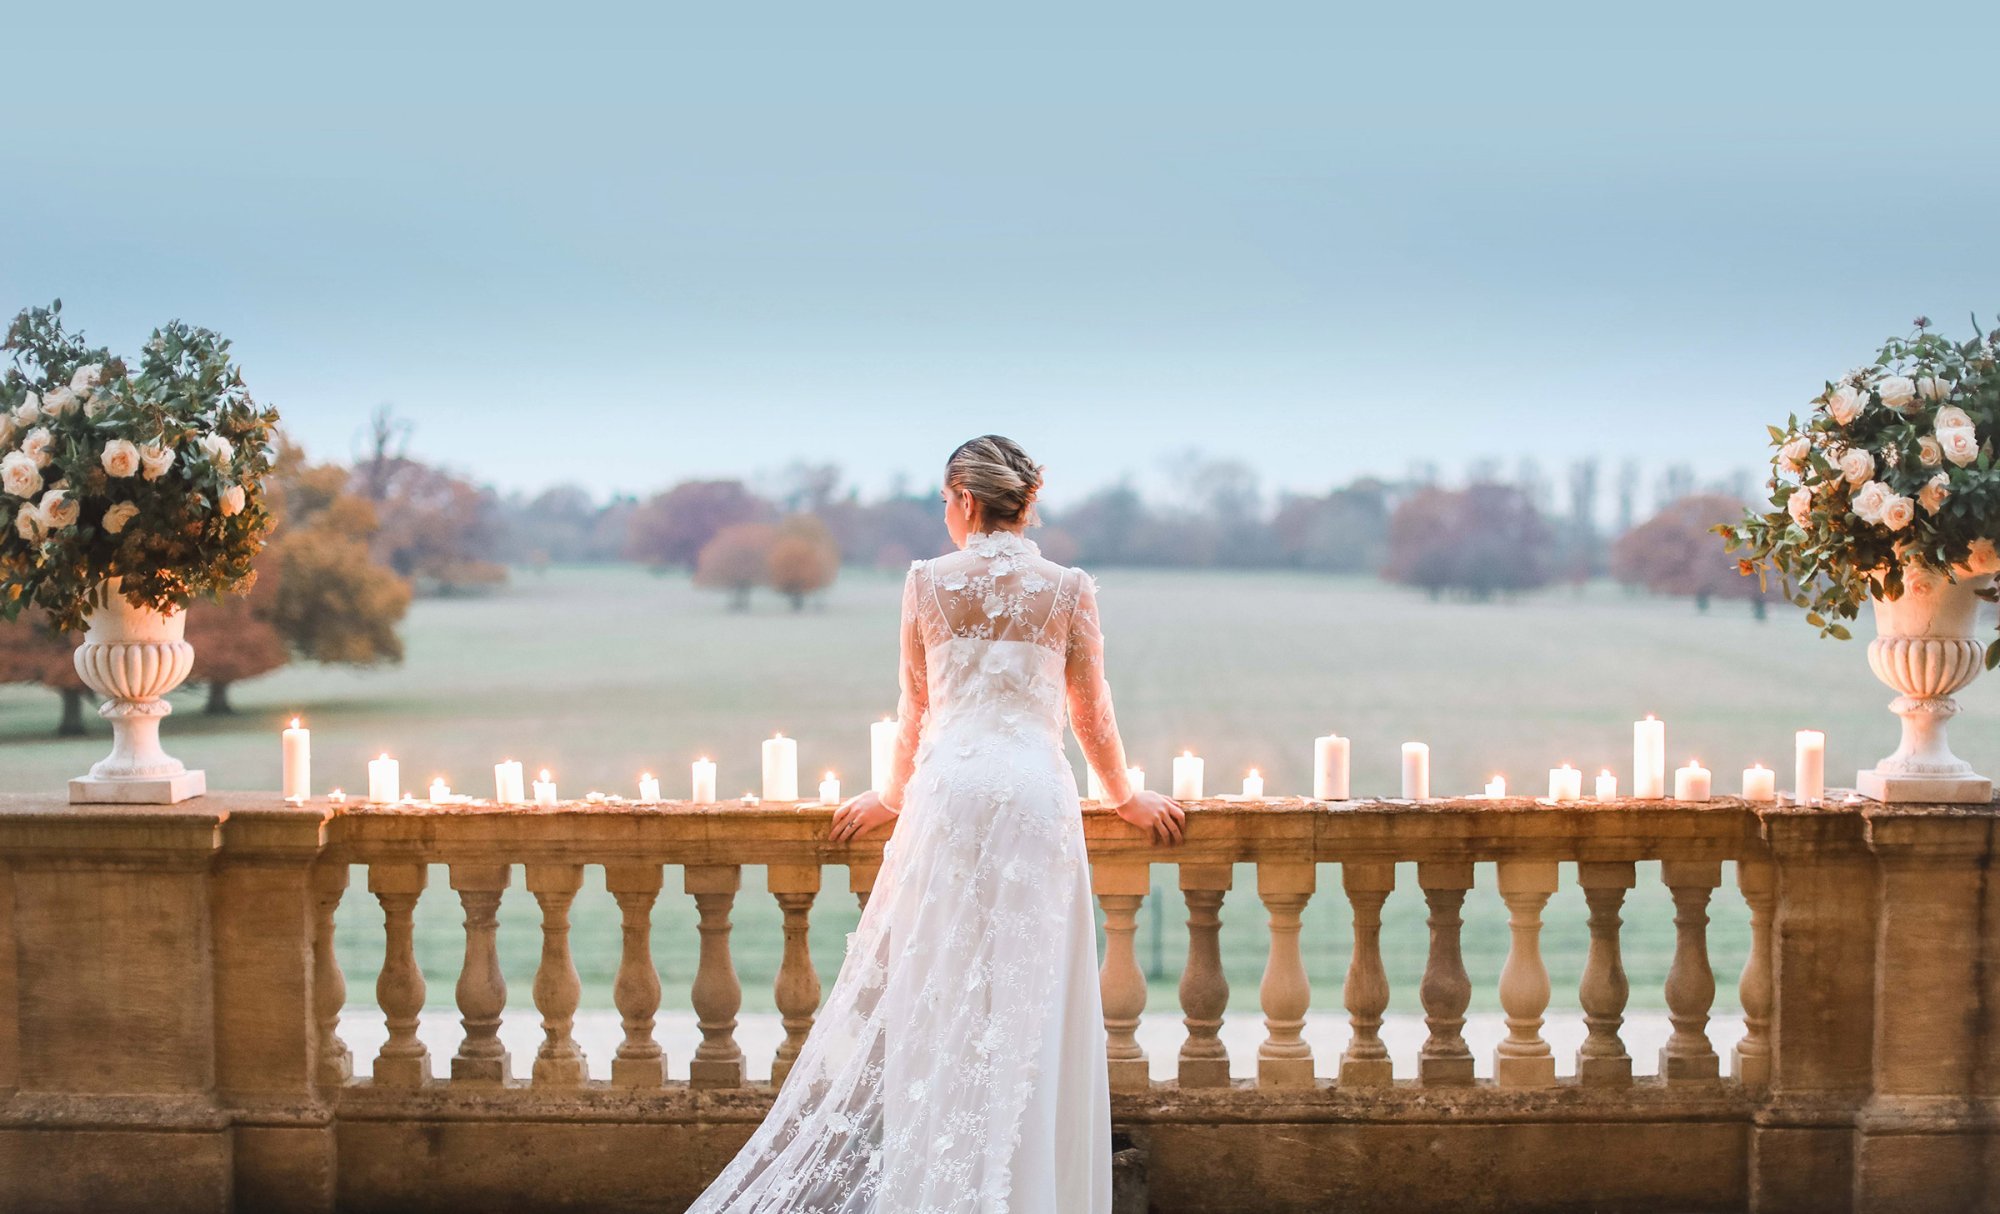 Bride looks out to countryside from balcony at Kirtlington Park